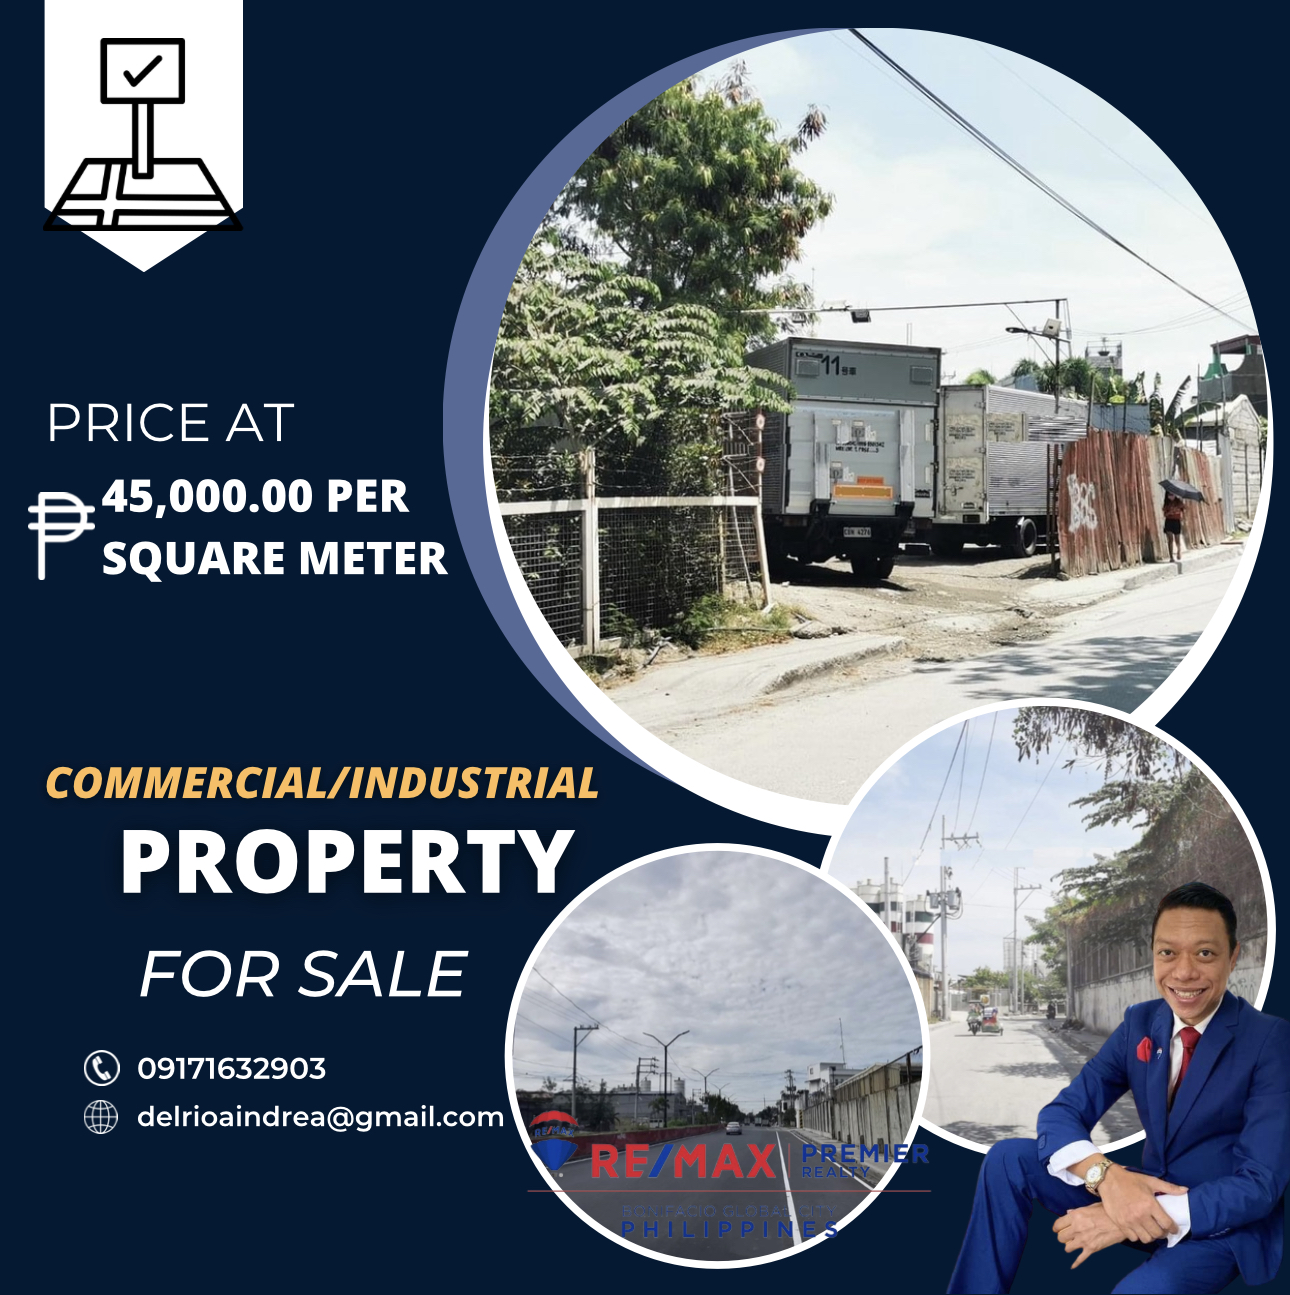 Taguig City – Commercial/Industrial Property for Sale‼️